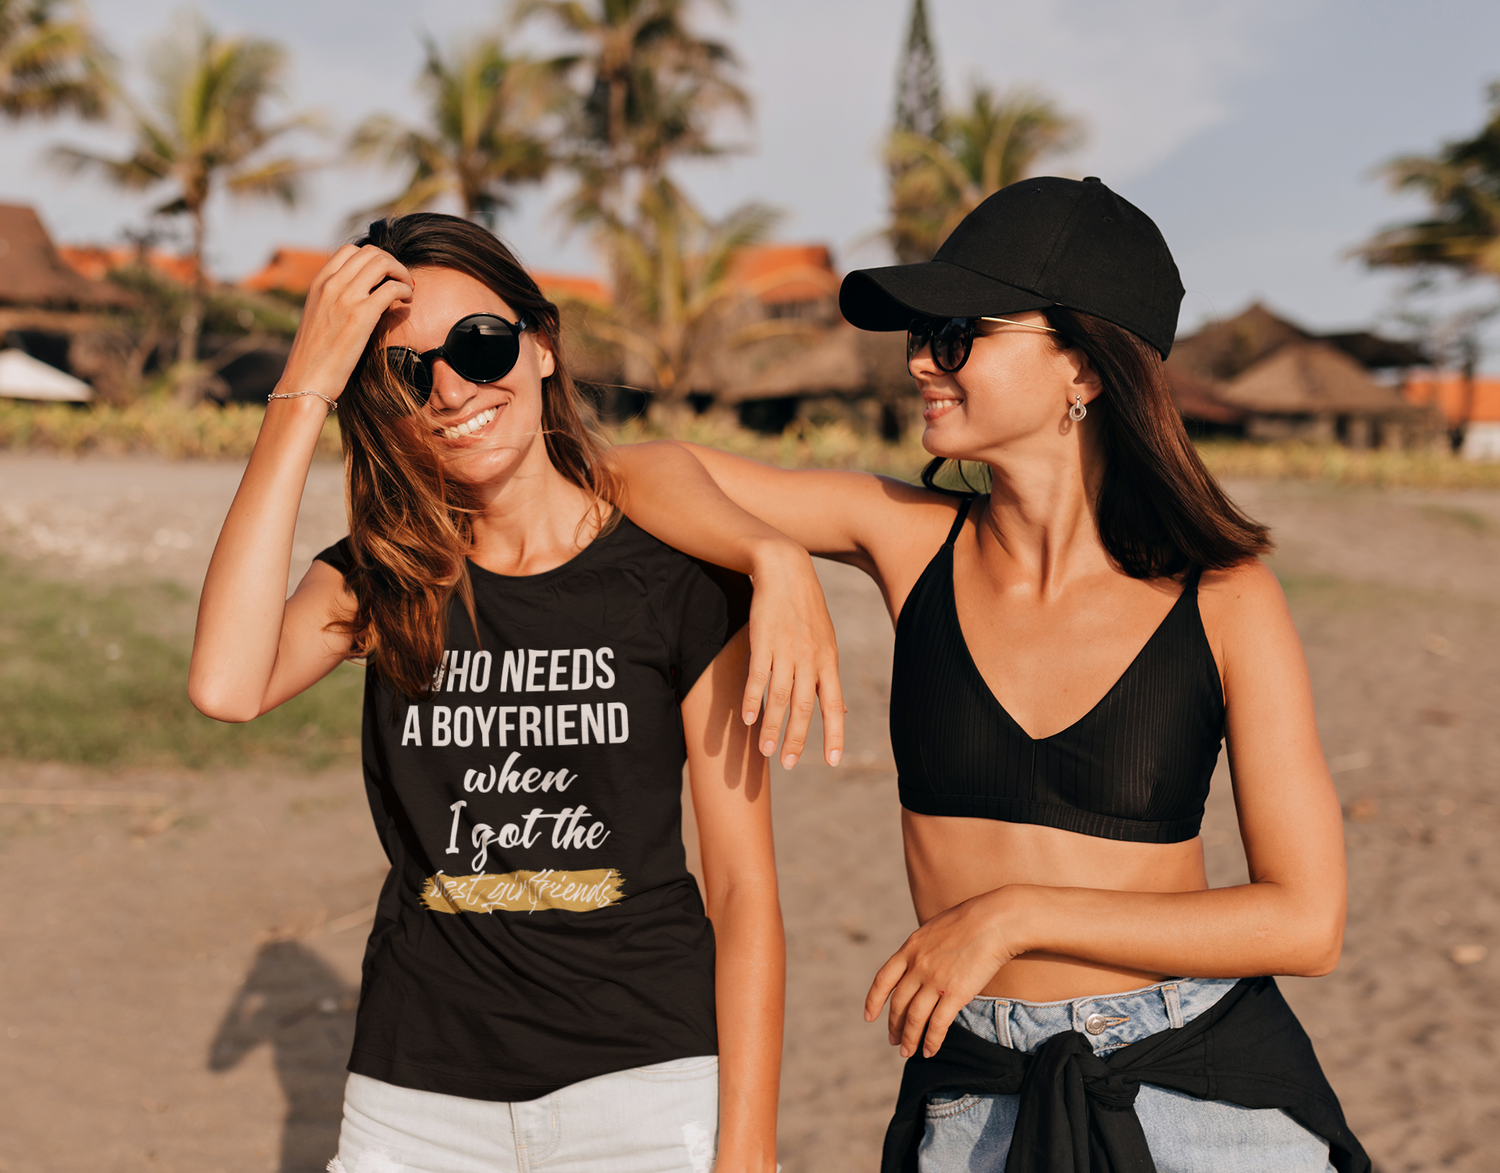 CHECK OUT THE BOYFRIEND COLLECTION